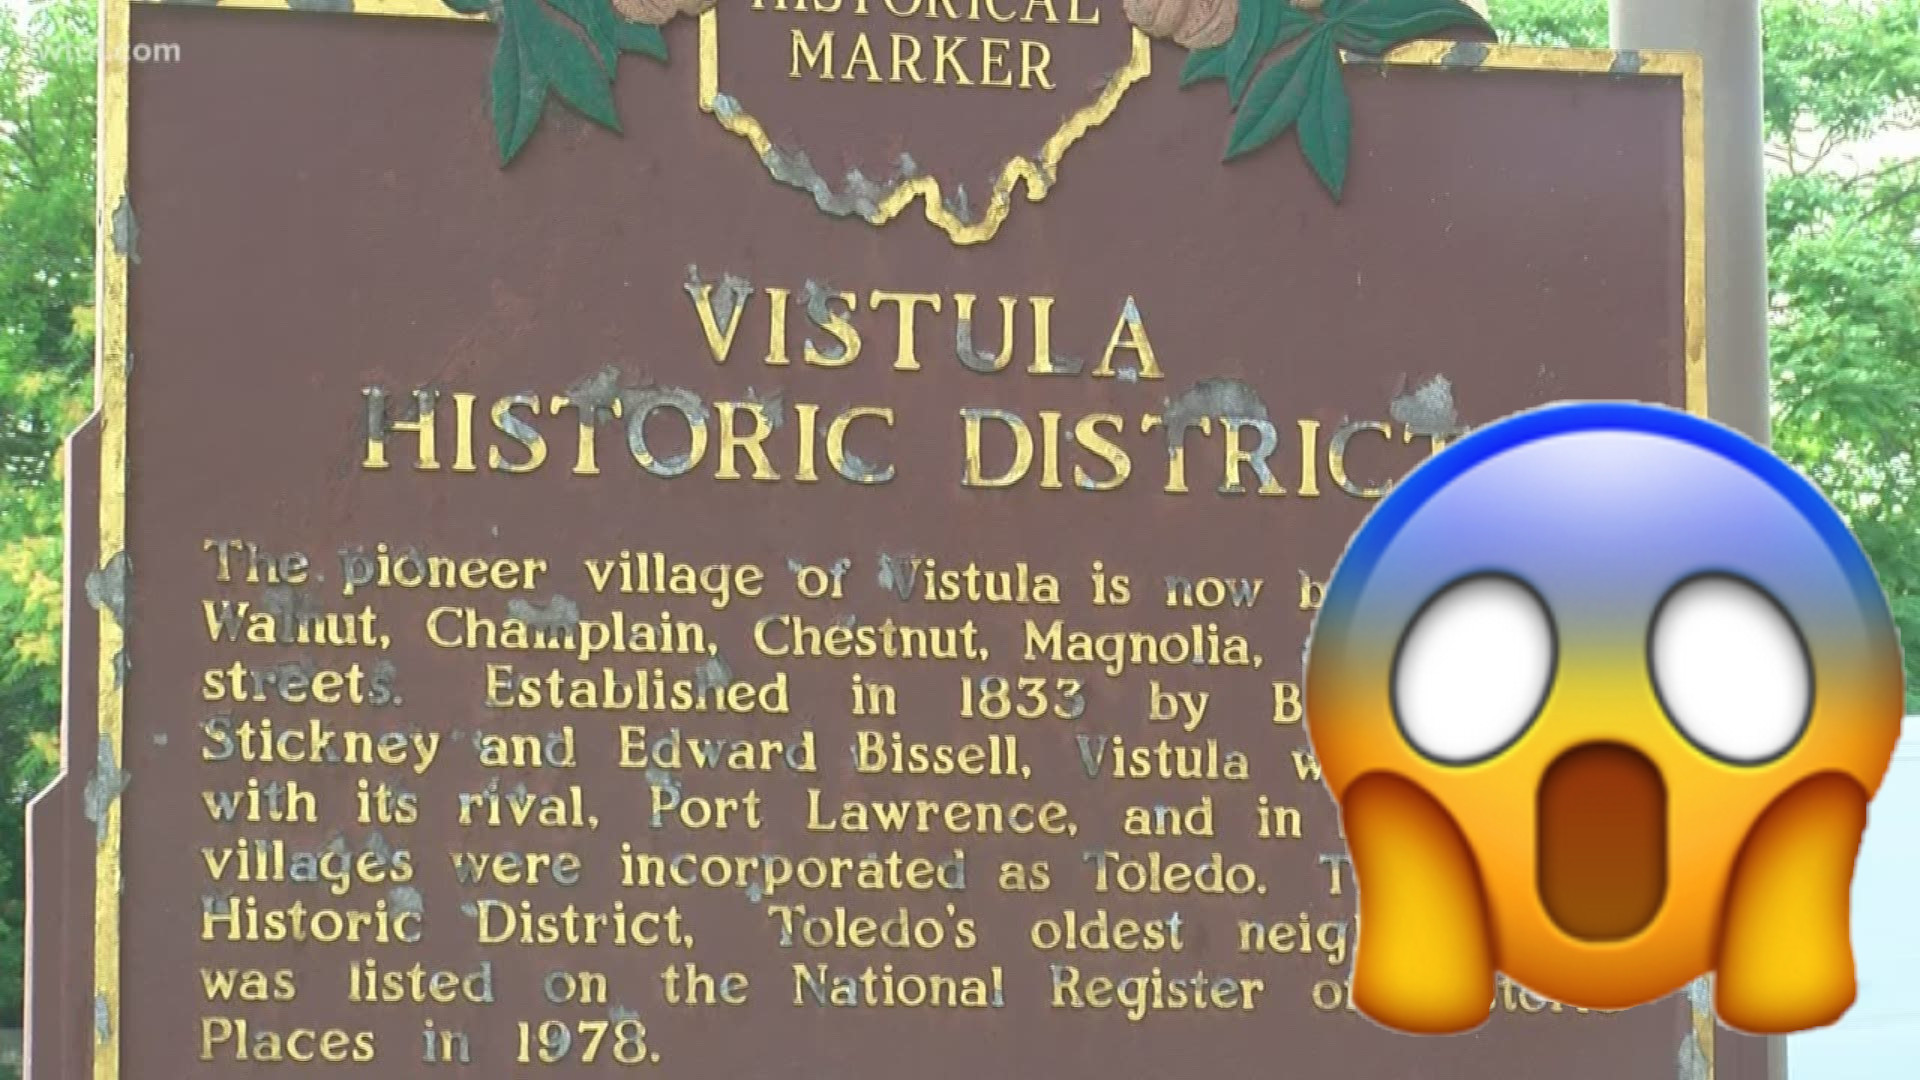 Take A Look At This CRAZY Story About The Historic Vistula District That Toledo News Is Trying To Cover Up!